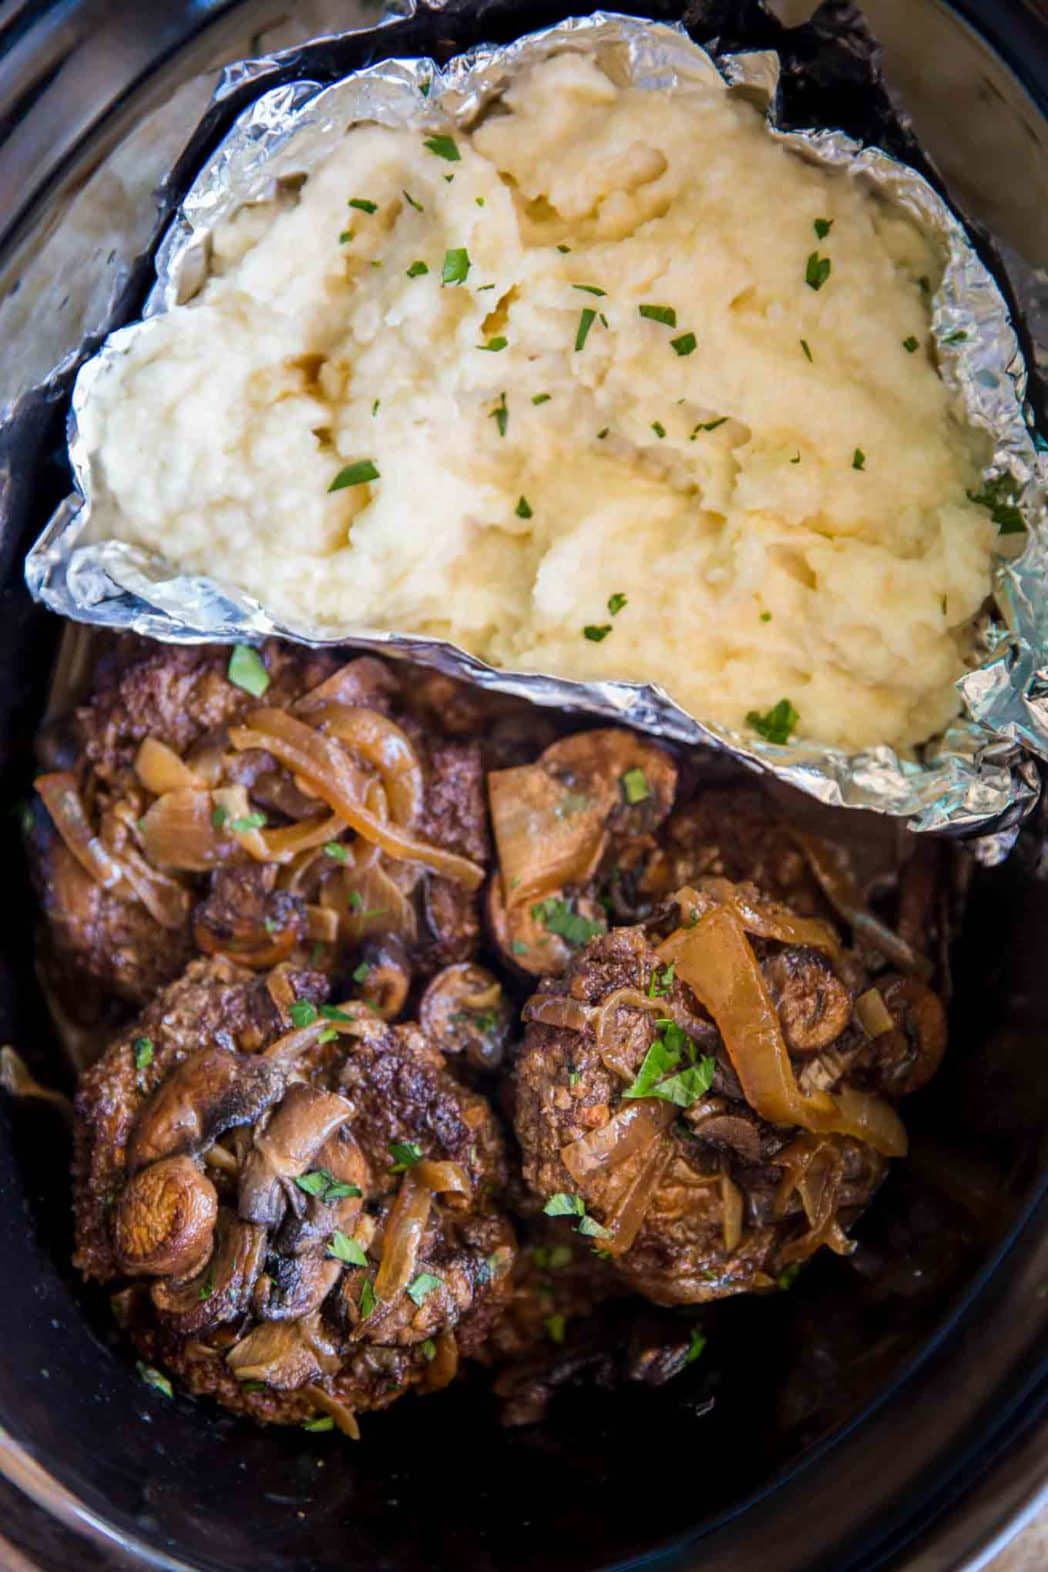 Slow Cooker Salisbury Steak and Mashed Potatoes in a SINGLE slow cooker with mashed potatoes, rich gravy, mushrooms and onions over tender beef patties.